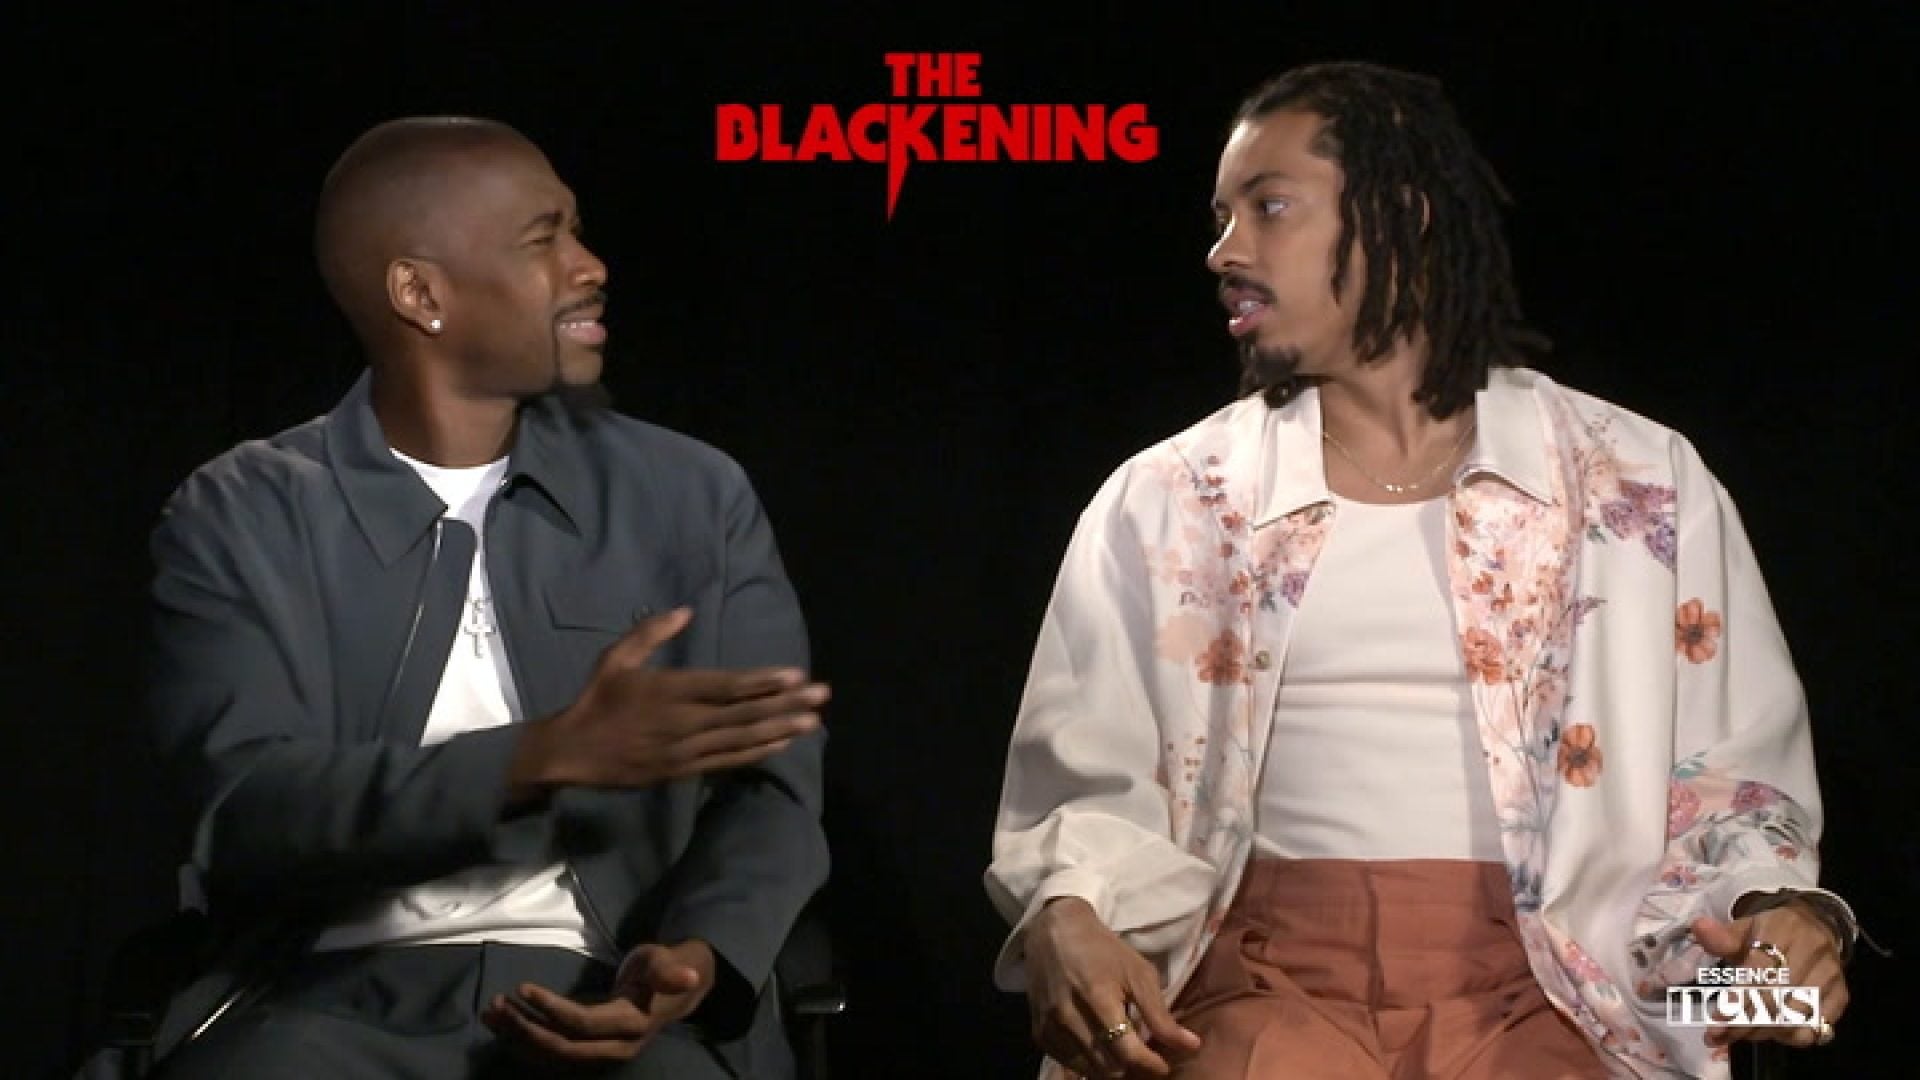 WATCH: 'The Blackening' Stars Jay Pharoah & Melvin Gregg Discuss What Classic Horror Films Would Be Like With All-Black Casts